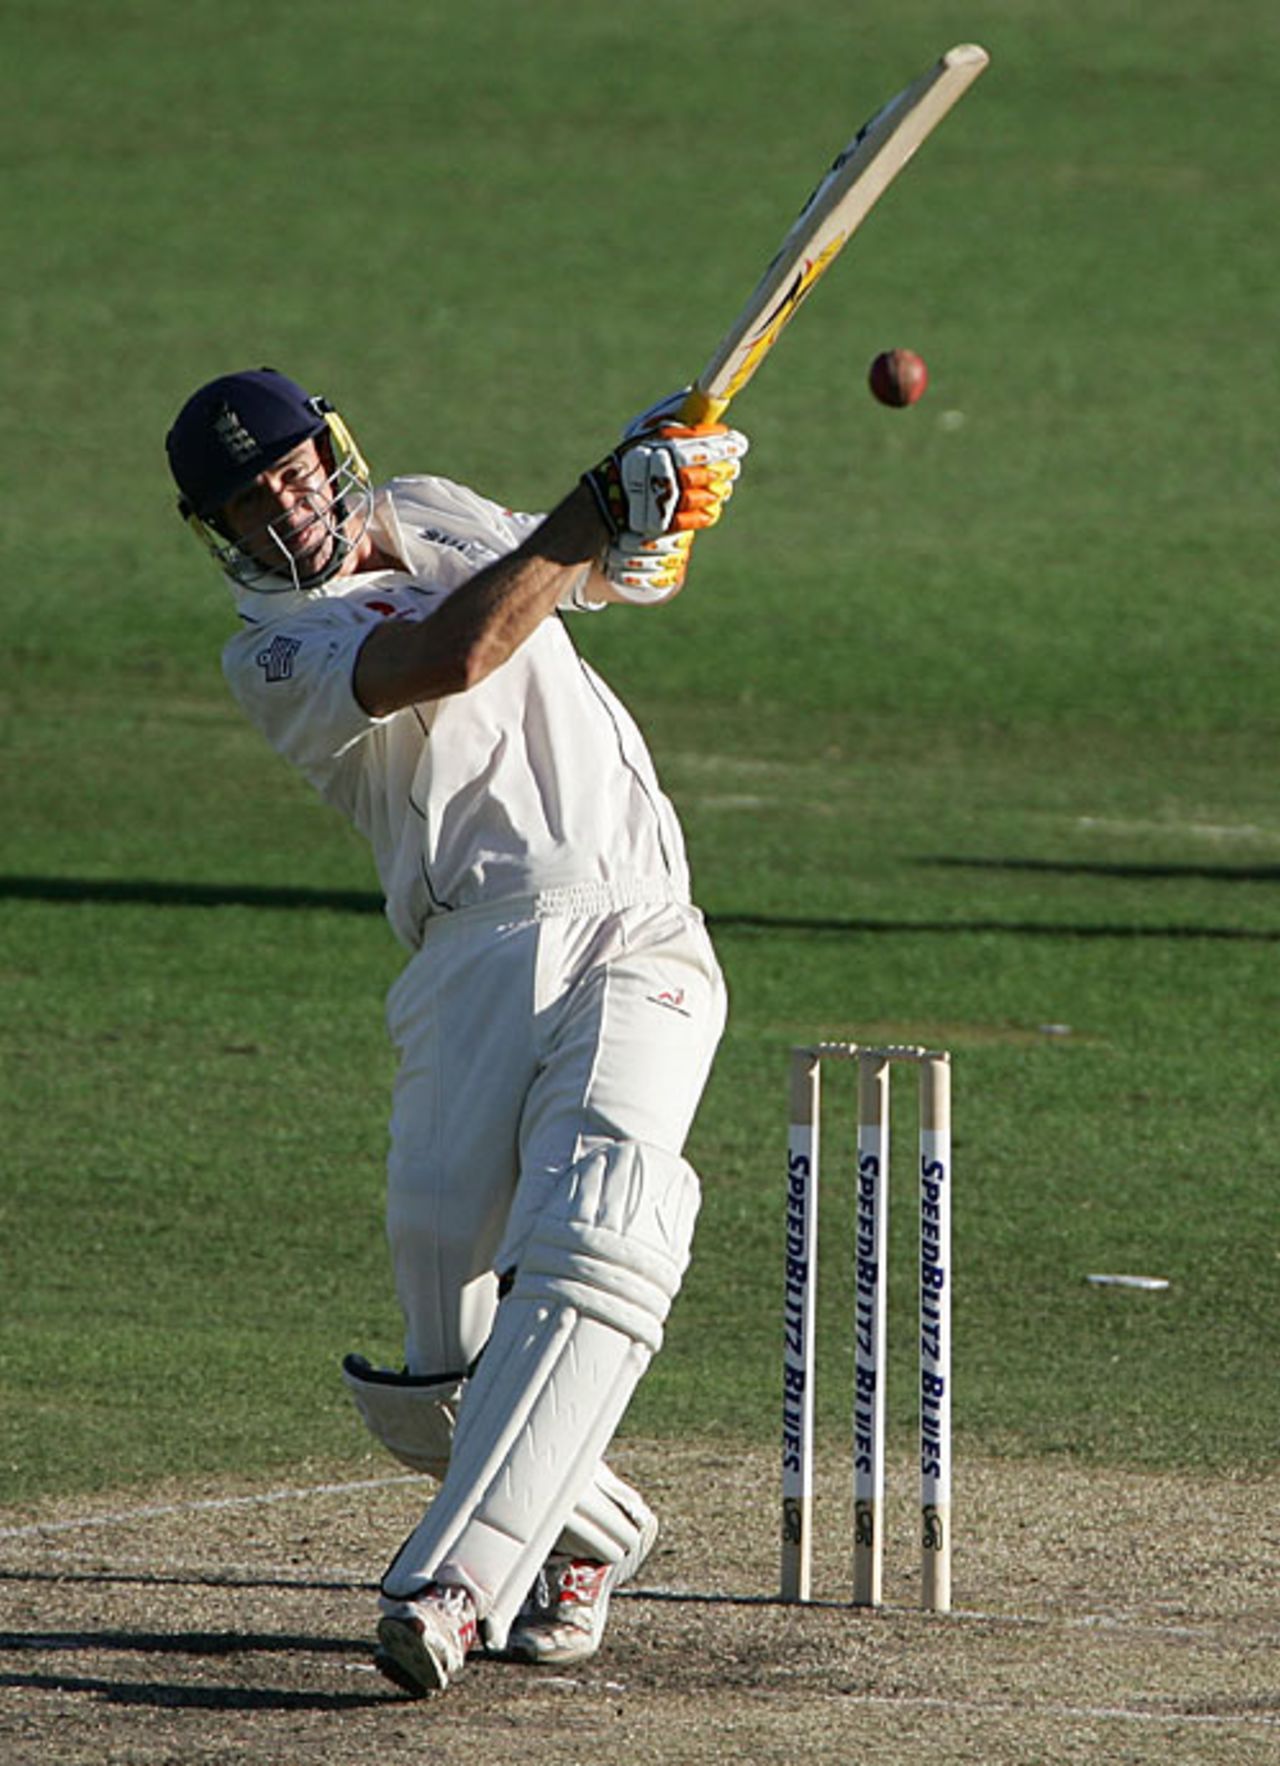 Kevin Pietersen launches another four over midwicket, New South Wales v England, Sydney, November 13, 2006